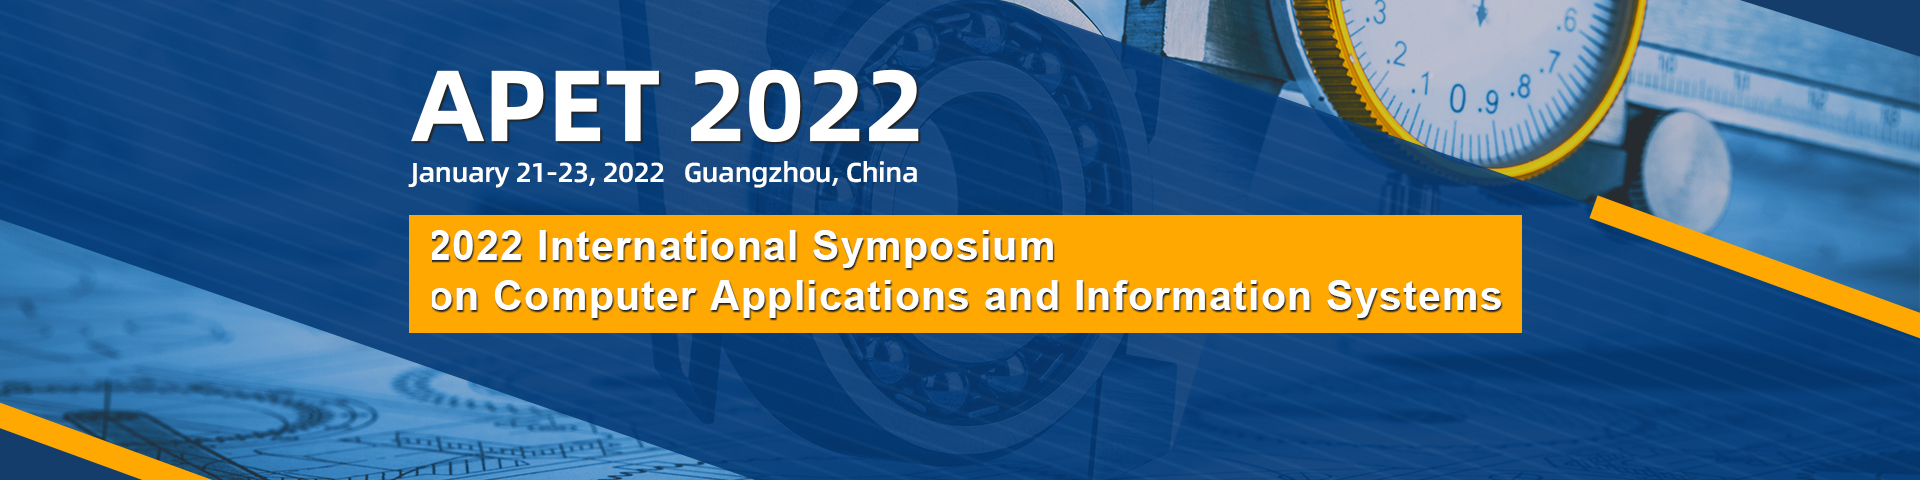 2022 International Conference on Applied Physics and Engineering Technology (APET 2022), Guangzhou, Guangdong, China